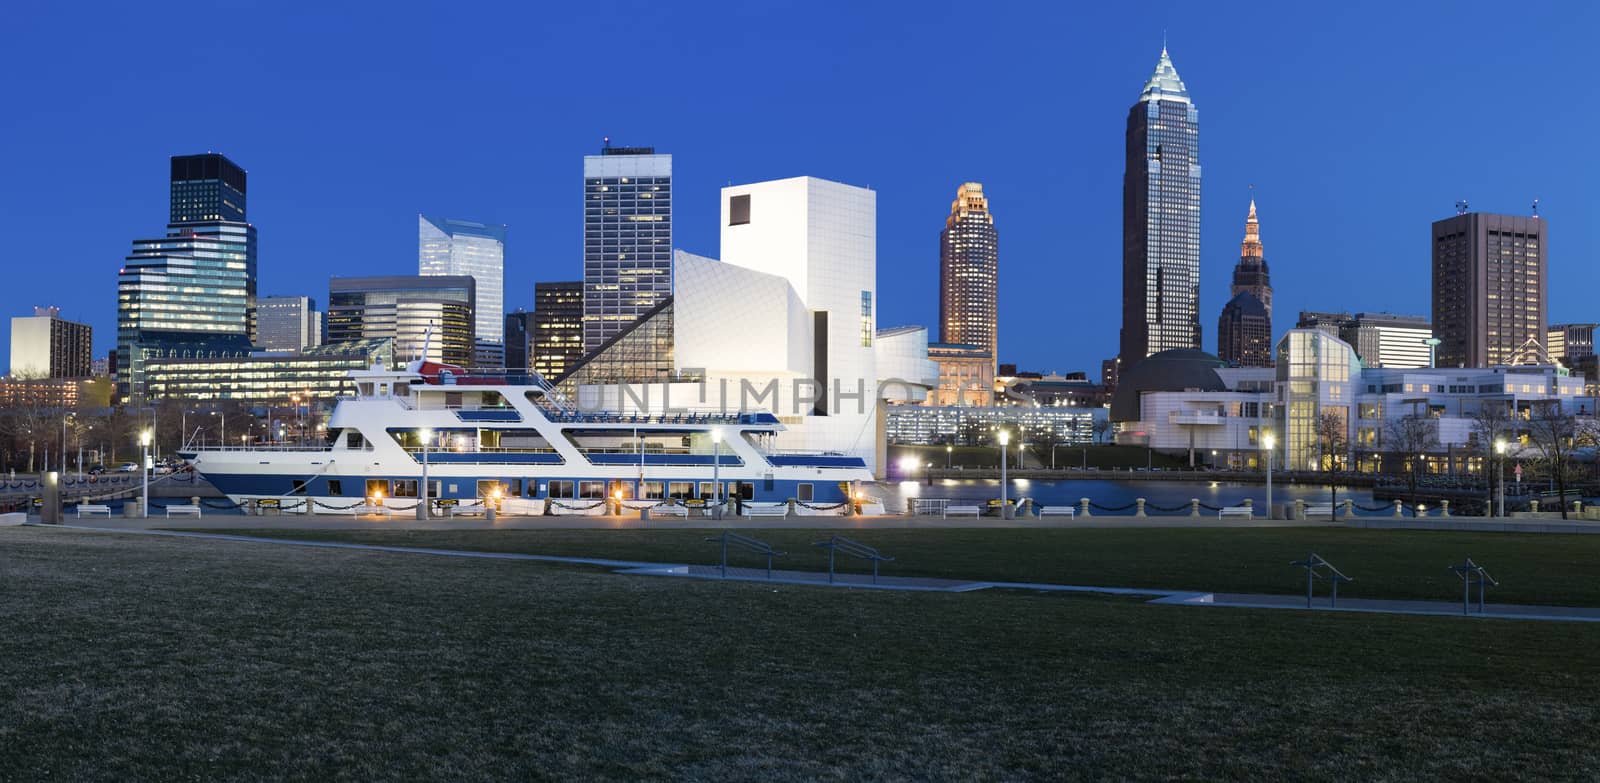 Cleveland panorama - winter evening from the marina